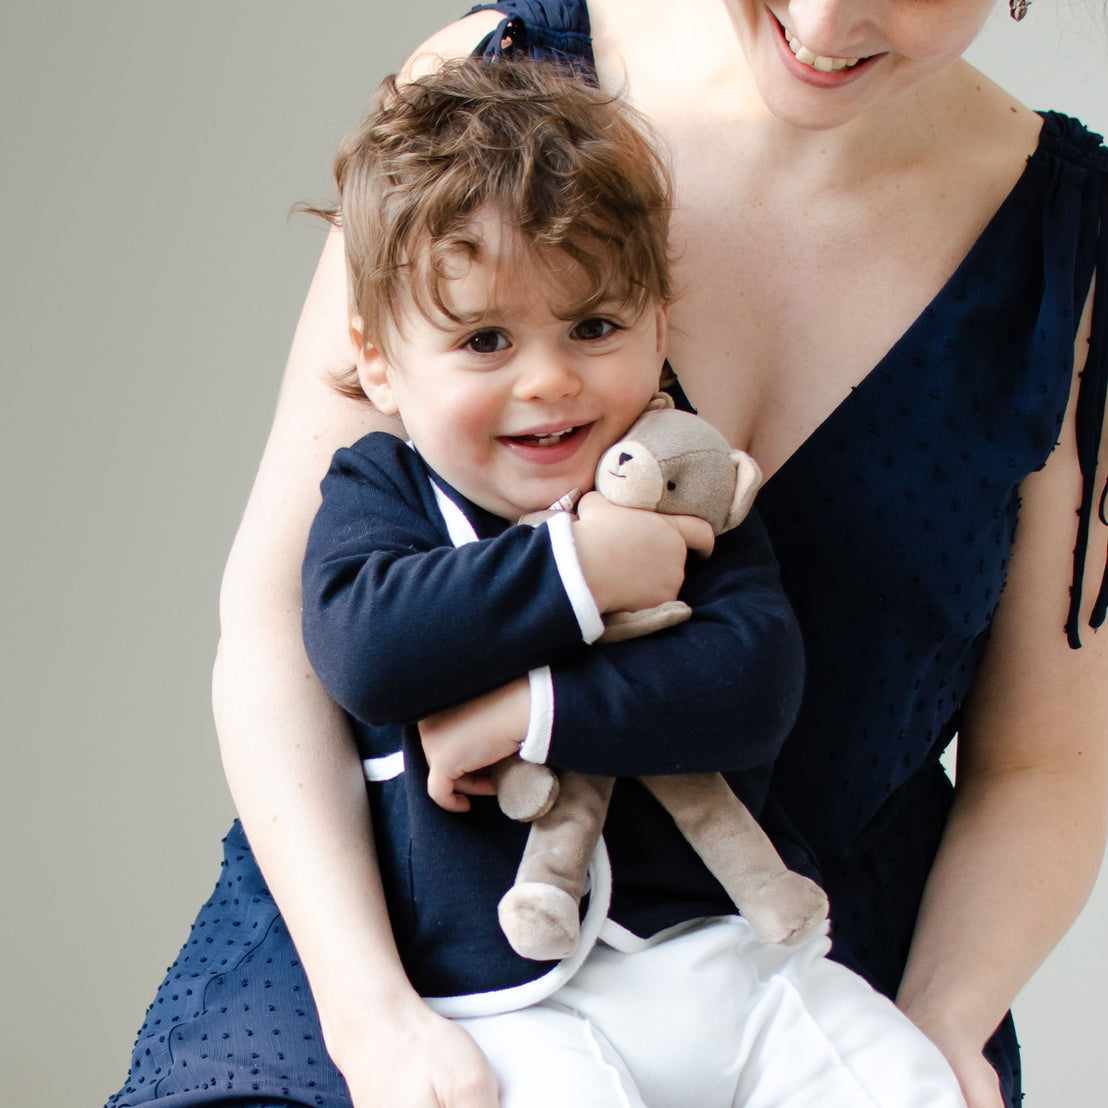 Smiling baby boy with his mother. He is holding on to the Elliott Bear Buddy Pacifier Holder, a floppy stuffed animal bear that clips on to a pacifier.